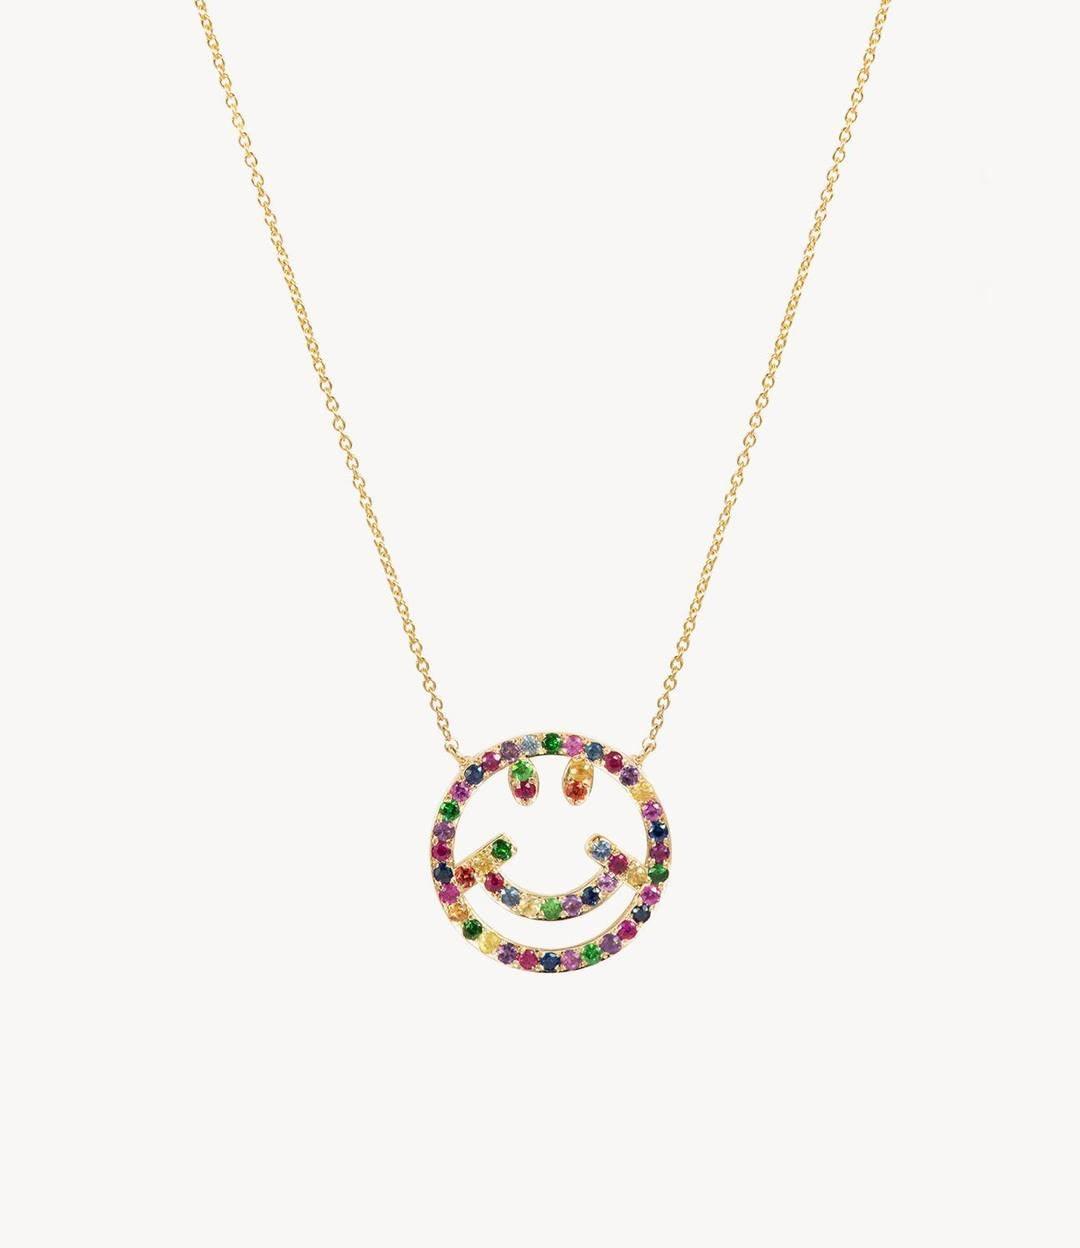 Rainbow Sapphire, Have a Nice Day Necklace - Roxanne First